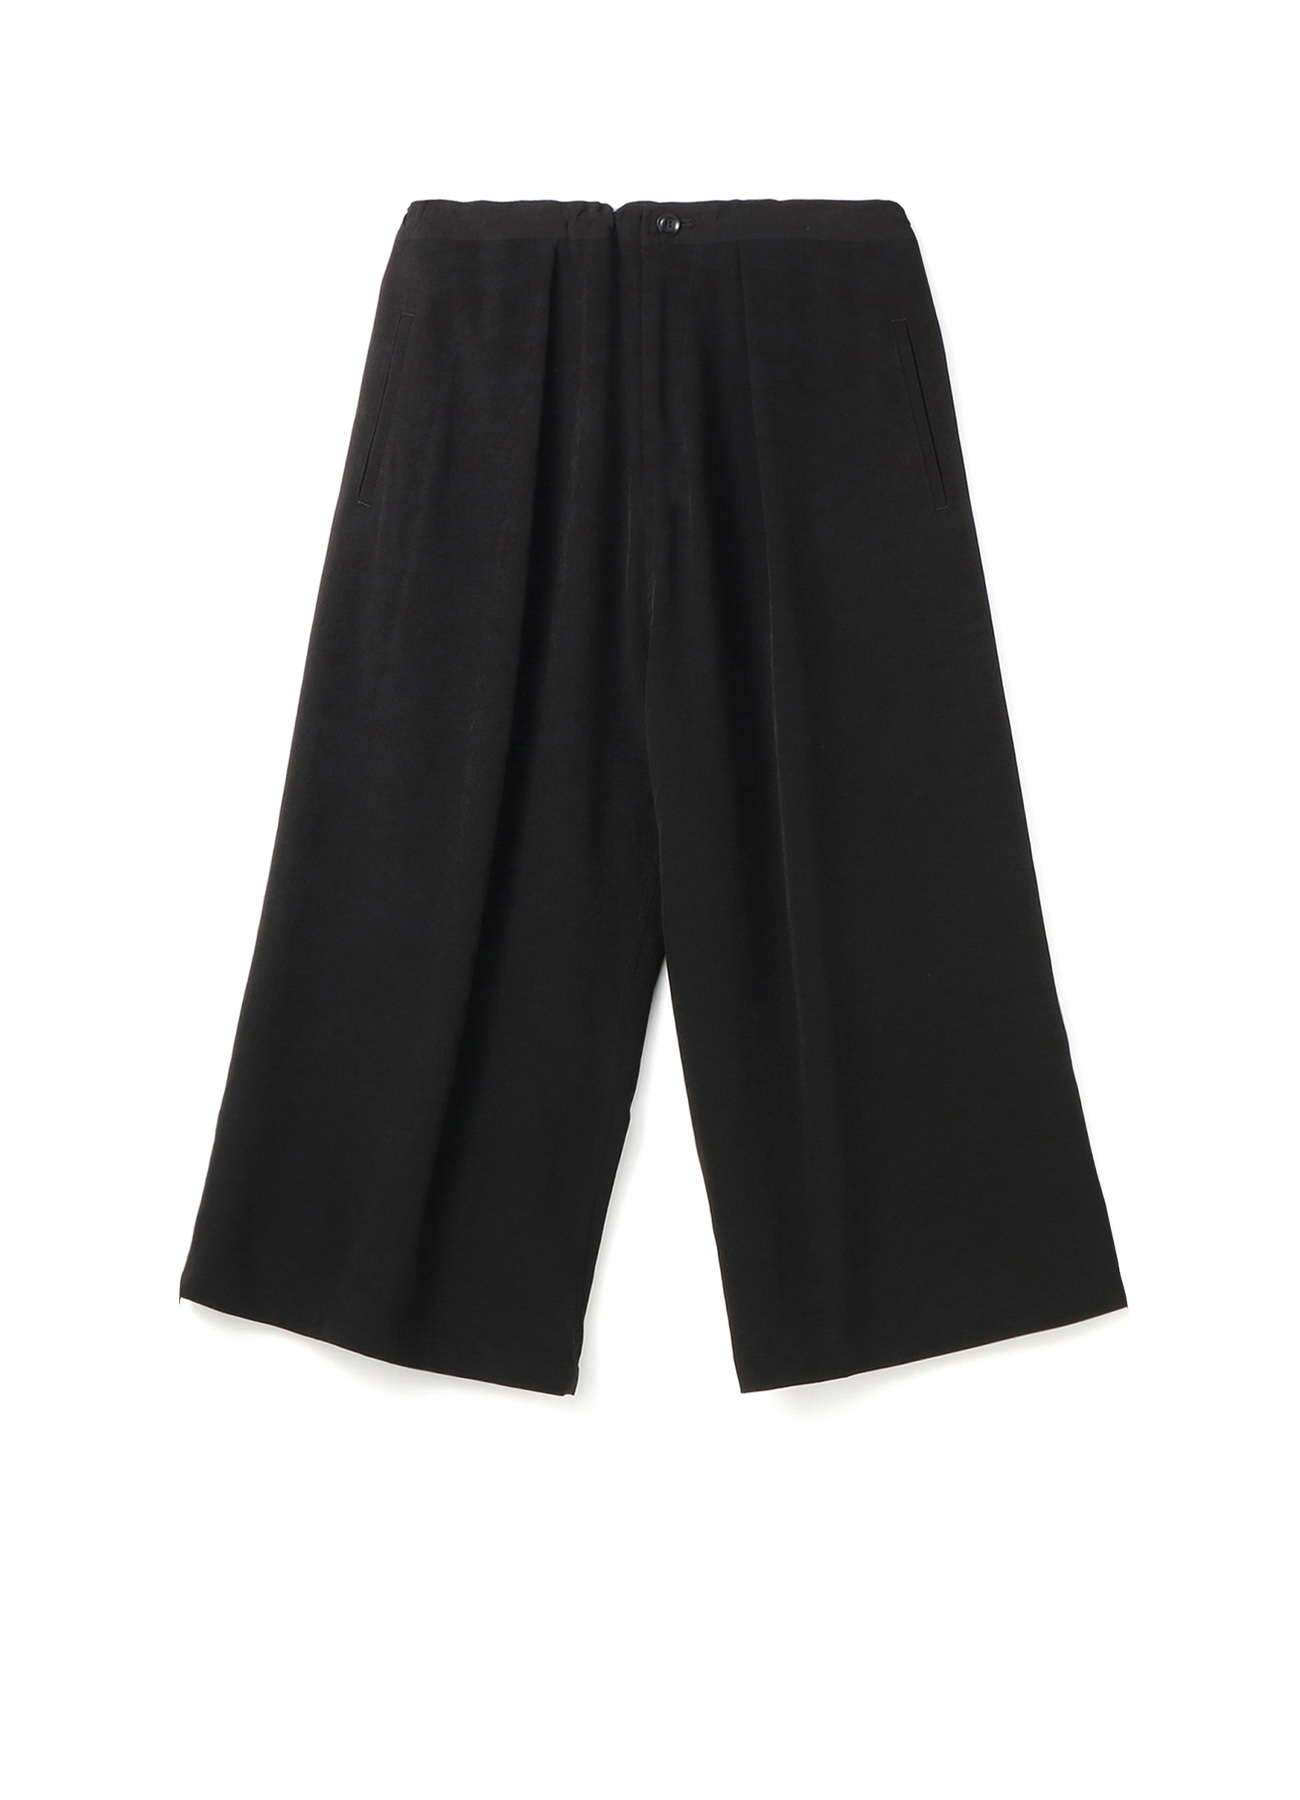 TRIACETATE POLYESTER de CHINE FRONT TUCK WIDE PANTS